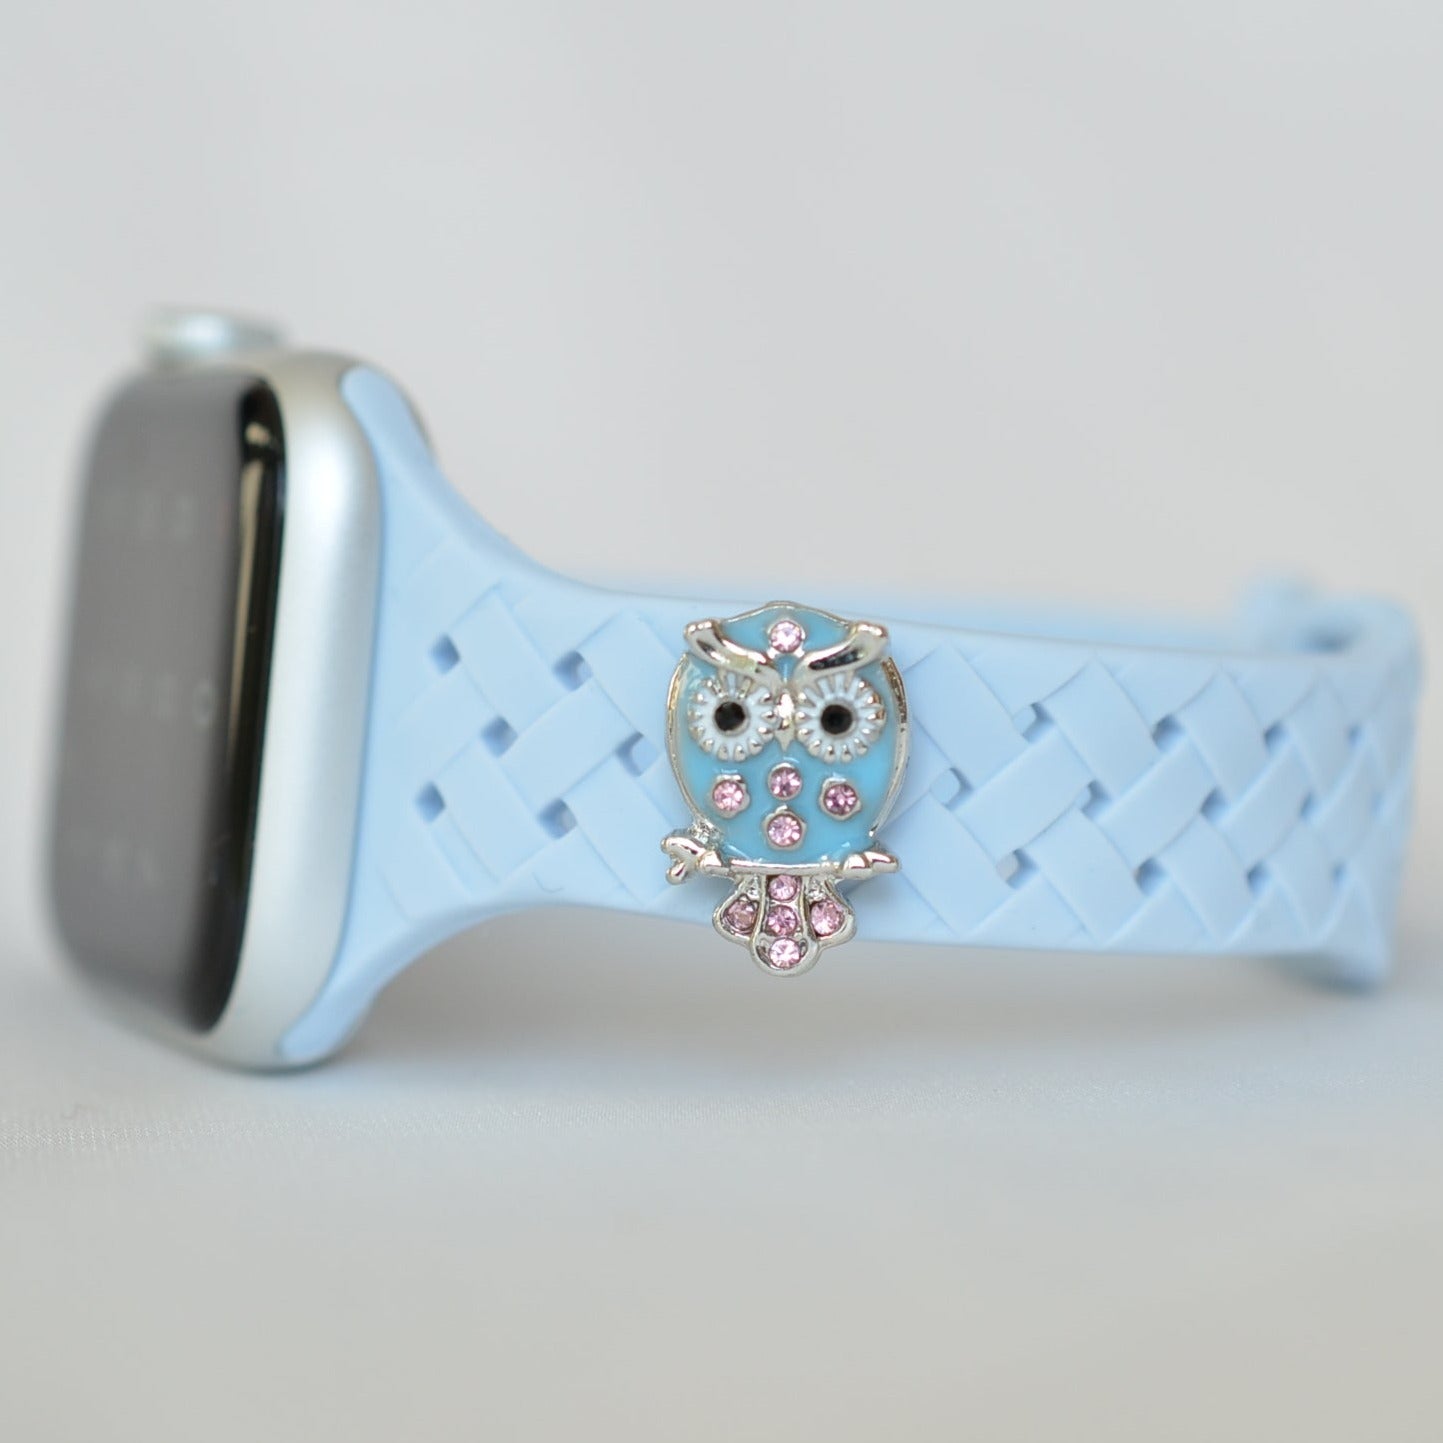 Light Blue Apple Band with Charm